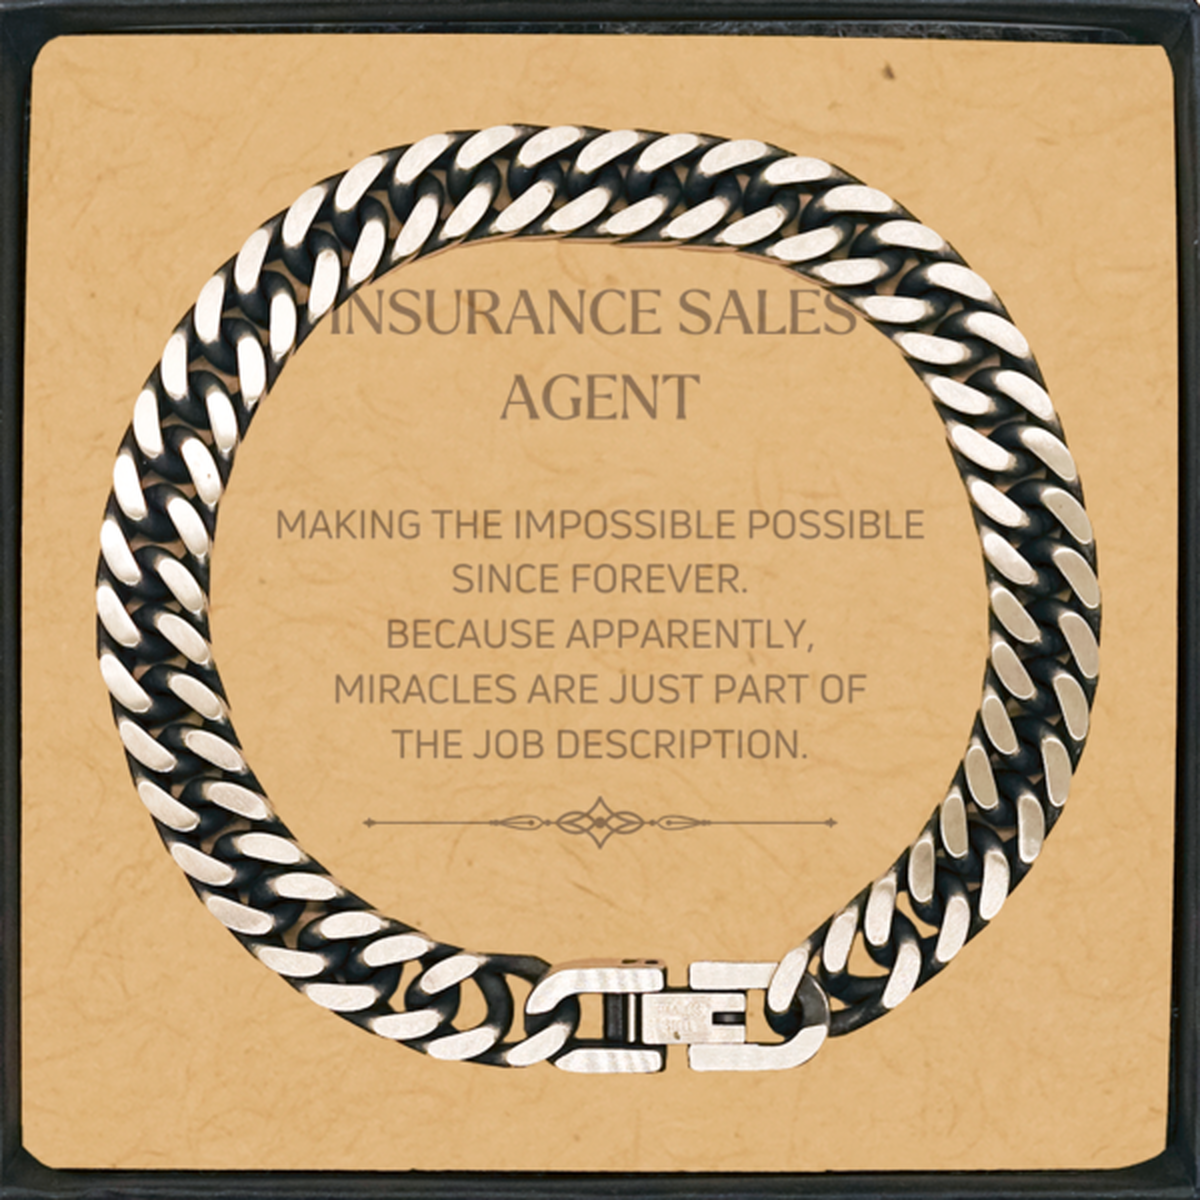 Funny Insurance Sales Agent Gifts, Miracles are just part of the job description, Inspirational Birthday Cuban Link Chain Bracelet For Insurance Sales Agent, Men, Women, Coworkers, Friends, Boss